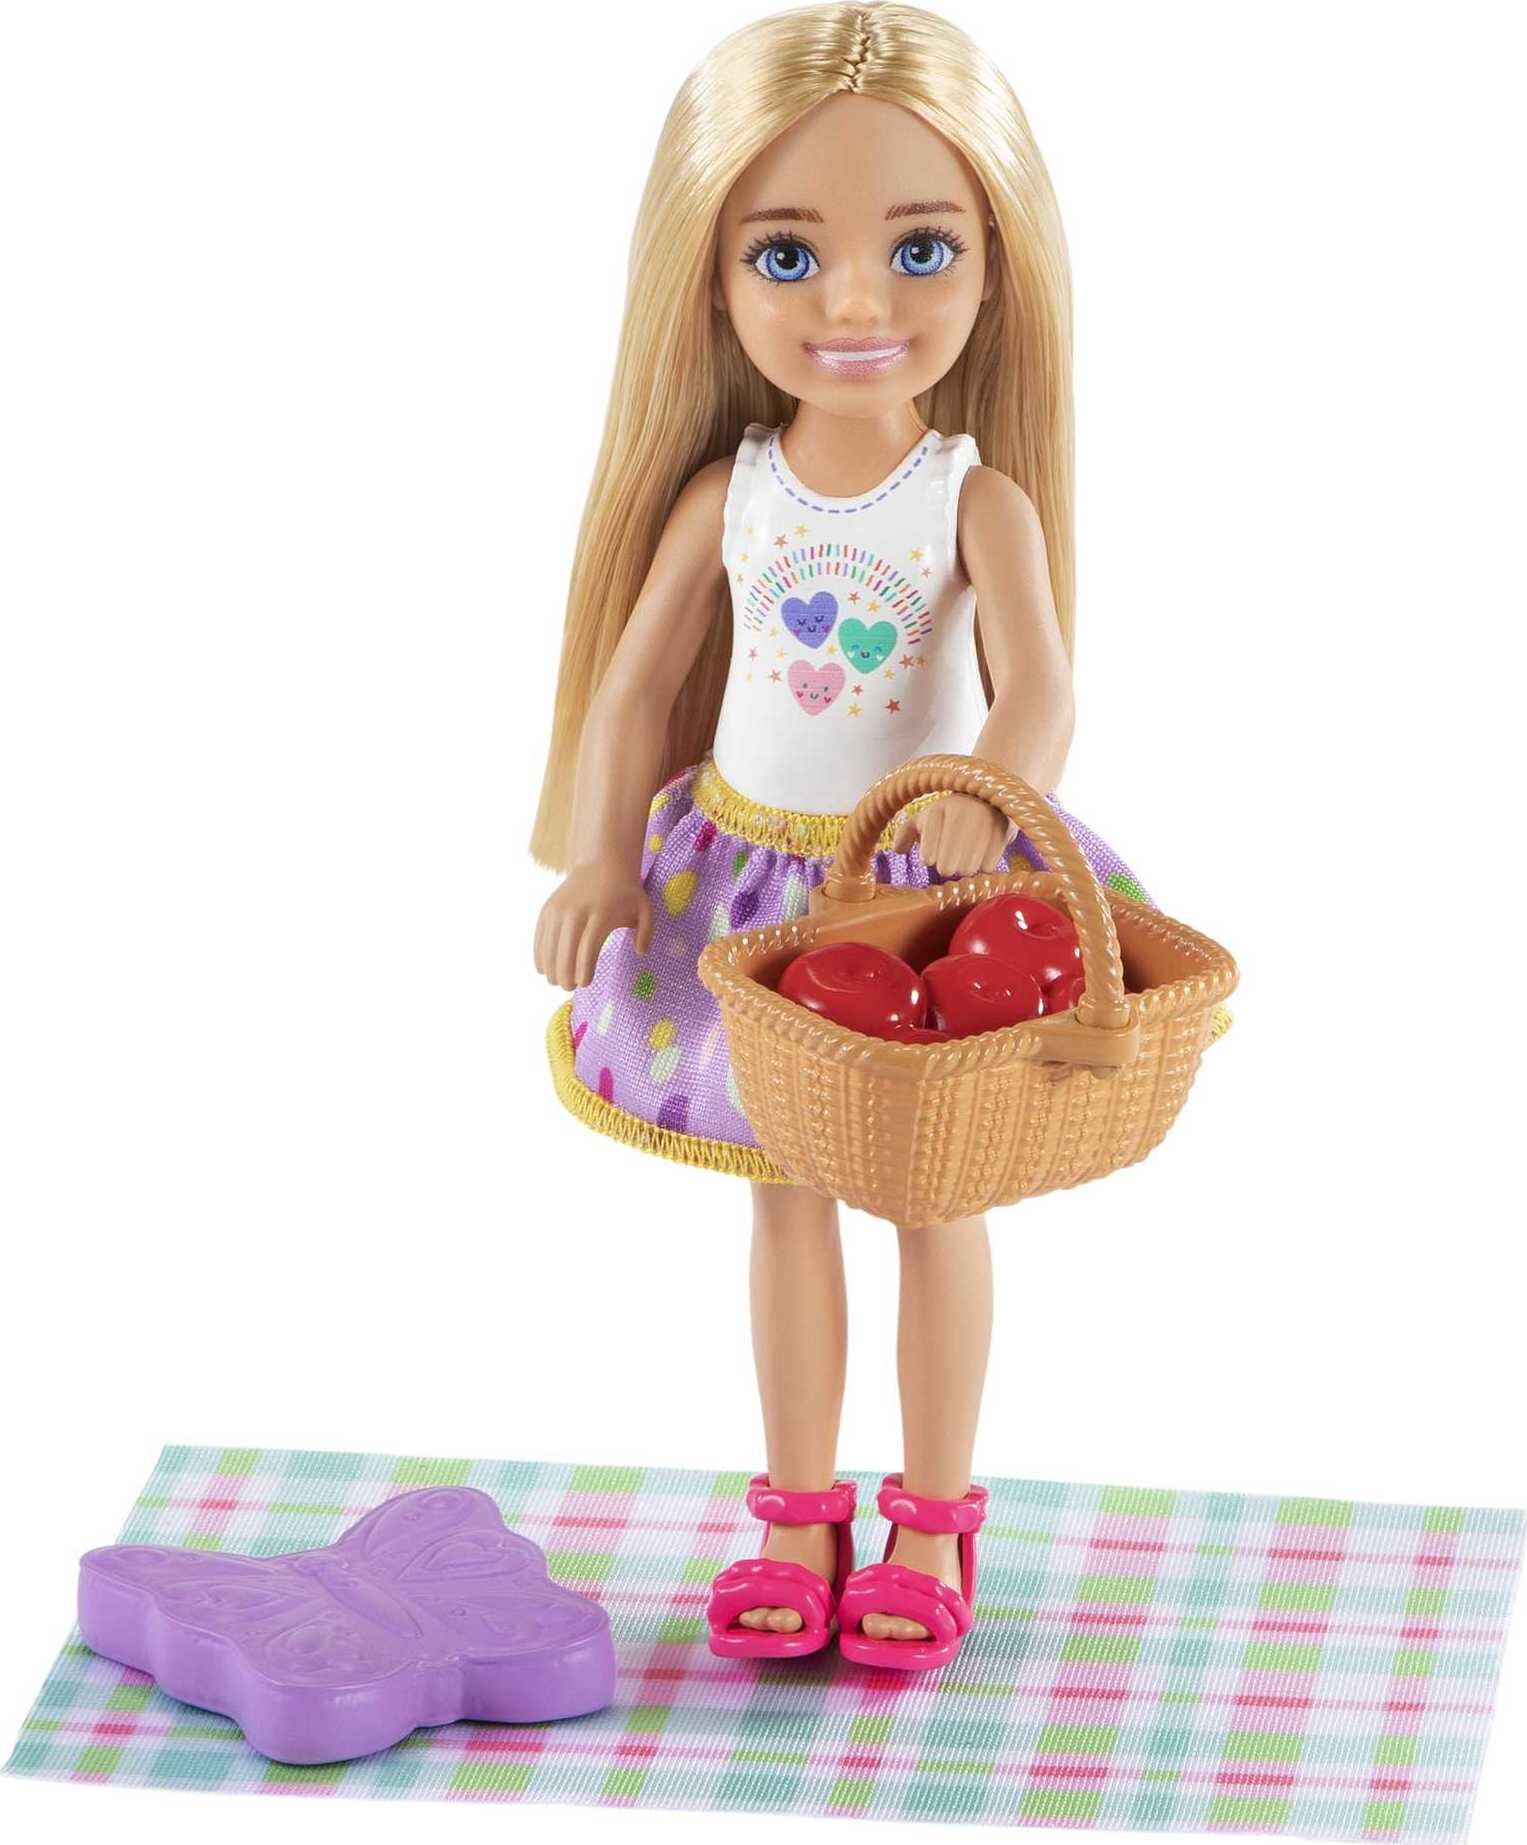 Barbie Chelsea Picnic Playset (6-in Blonde) with Pet Kitten, Table